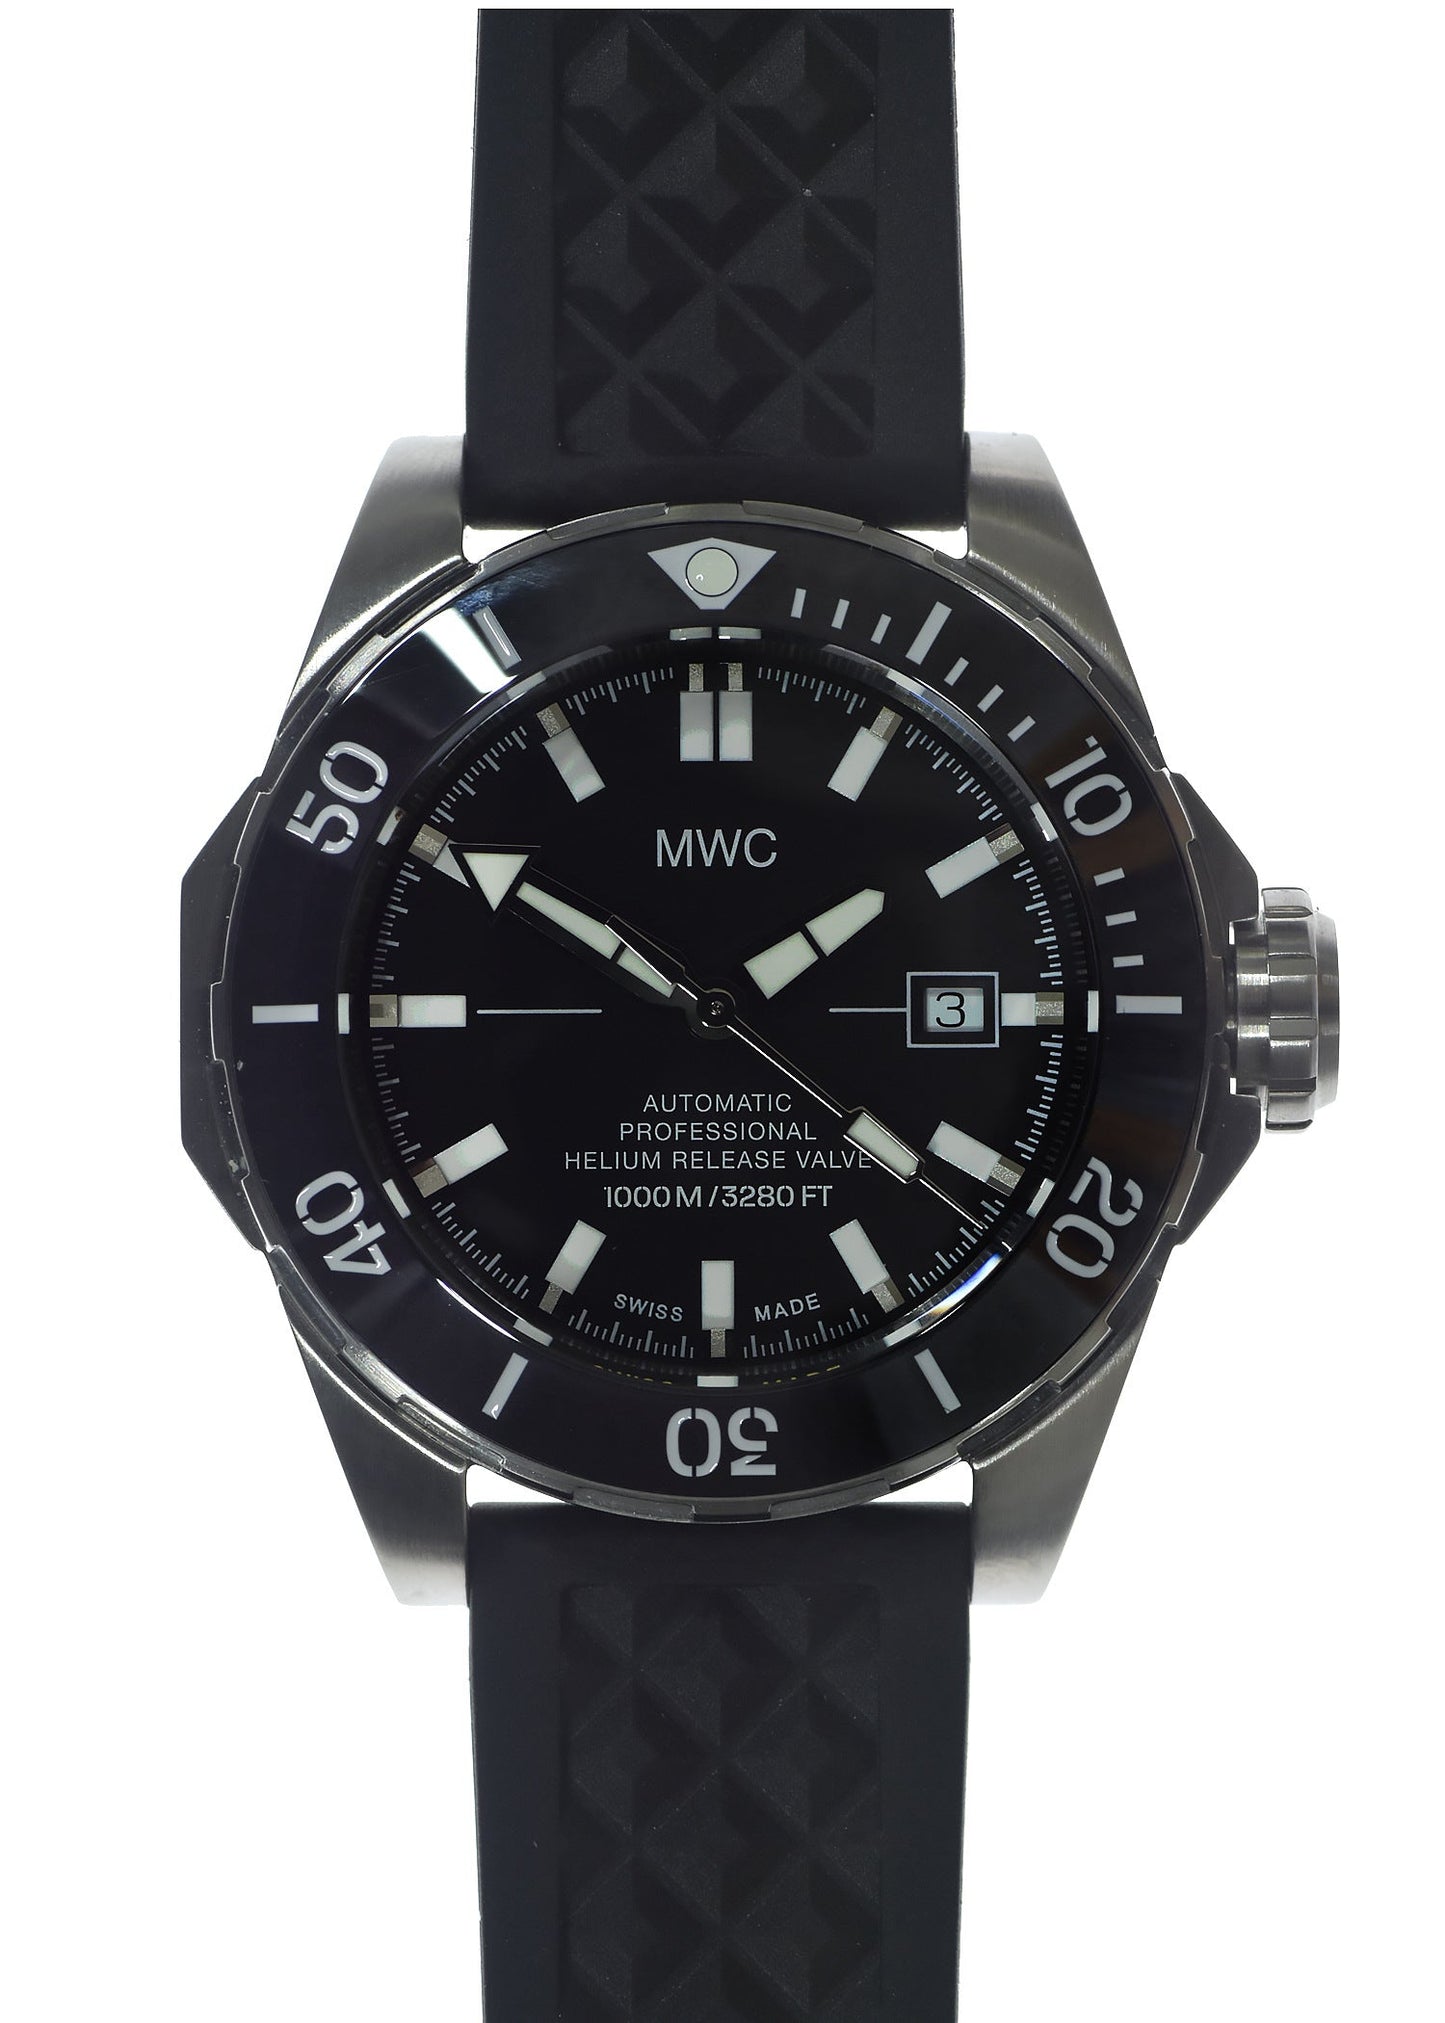 MWC 100atm / 3,280ft / 1000m Water Resistant Divers Watch in Stainless Steel Case with Helium Valve on Silicon Strap / 100% Swiss Made with Swiss 26 Jewel Automatic Movement - Special Introductory Offer